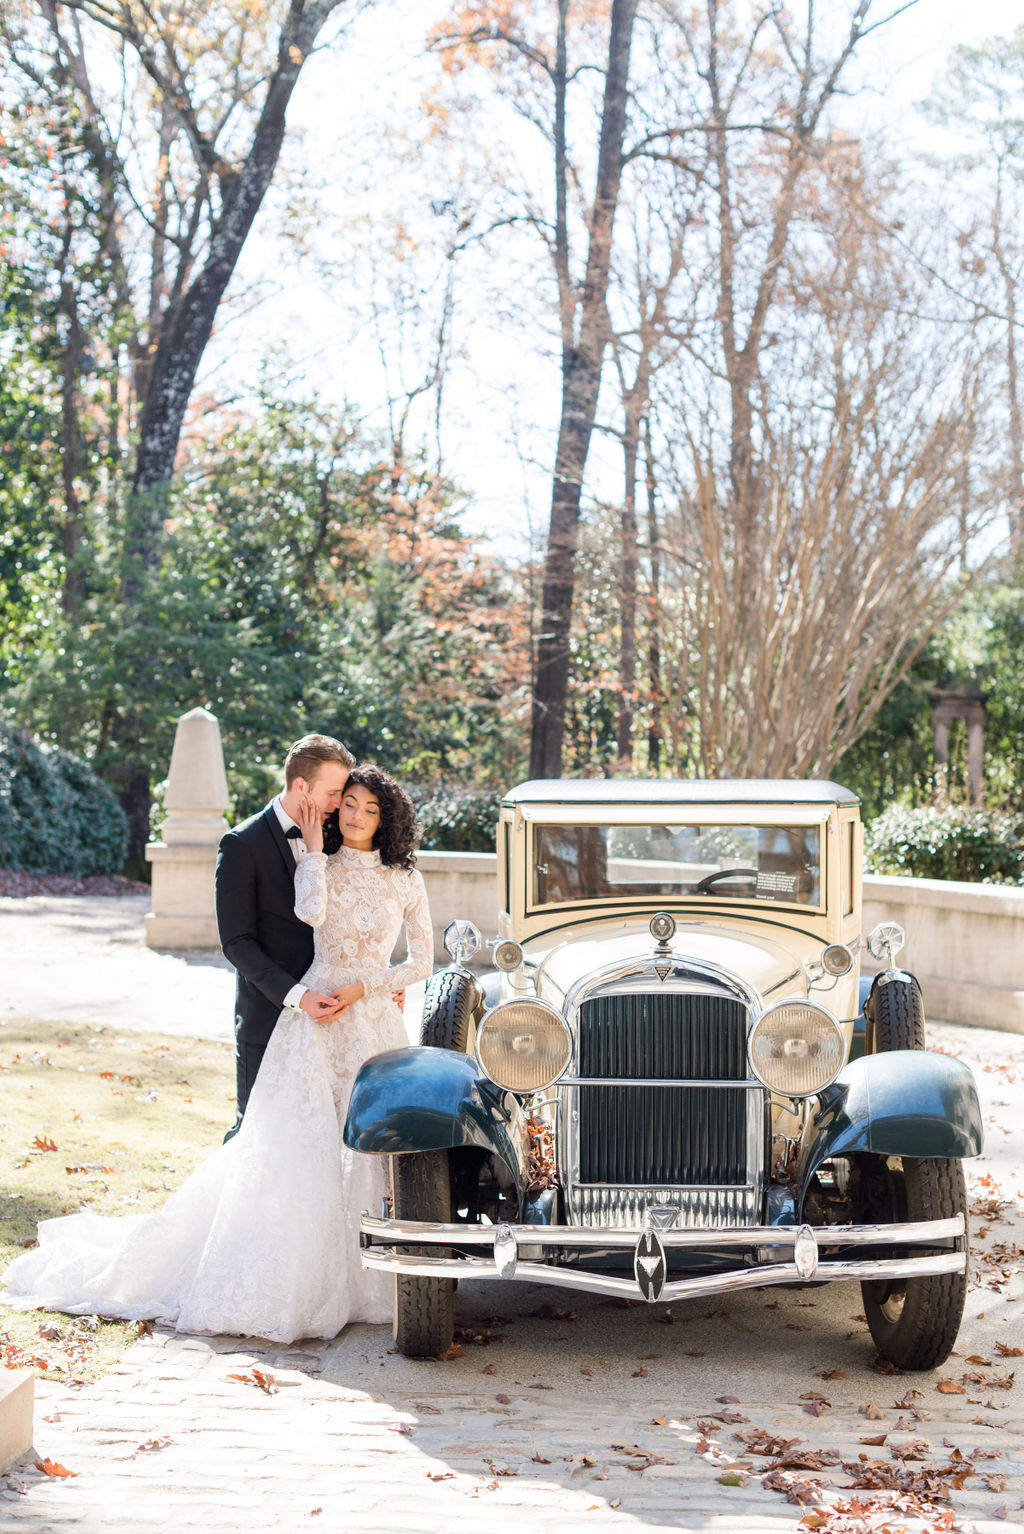 Rebecca Musayev is a Nashville wedding photographer who embraces southern traditions and modern luxury. Creating a tailored experience rooted in legacy for refined couples.